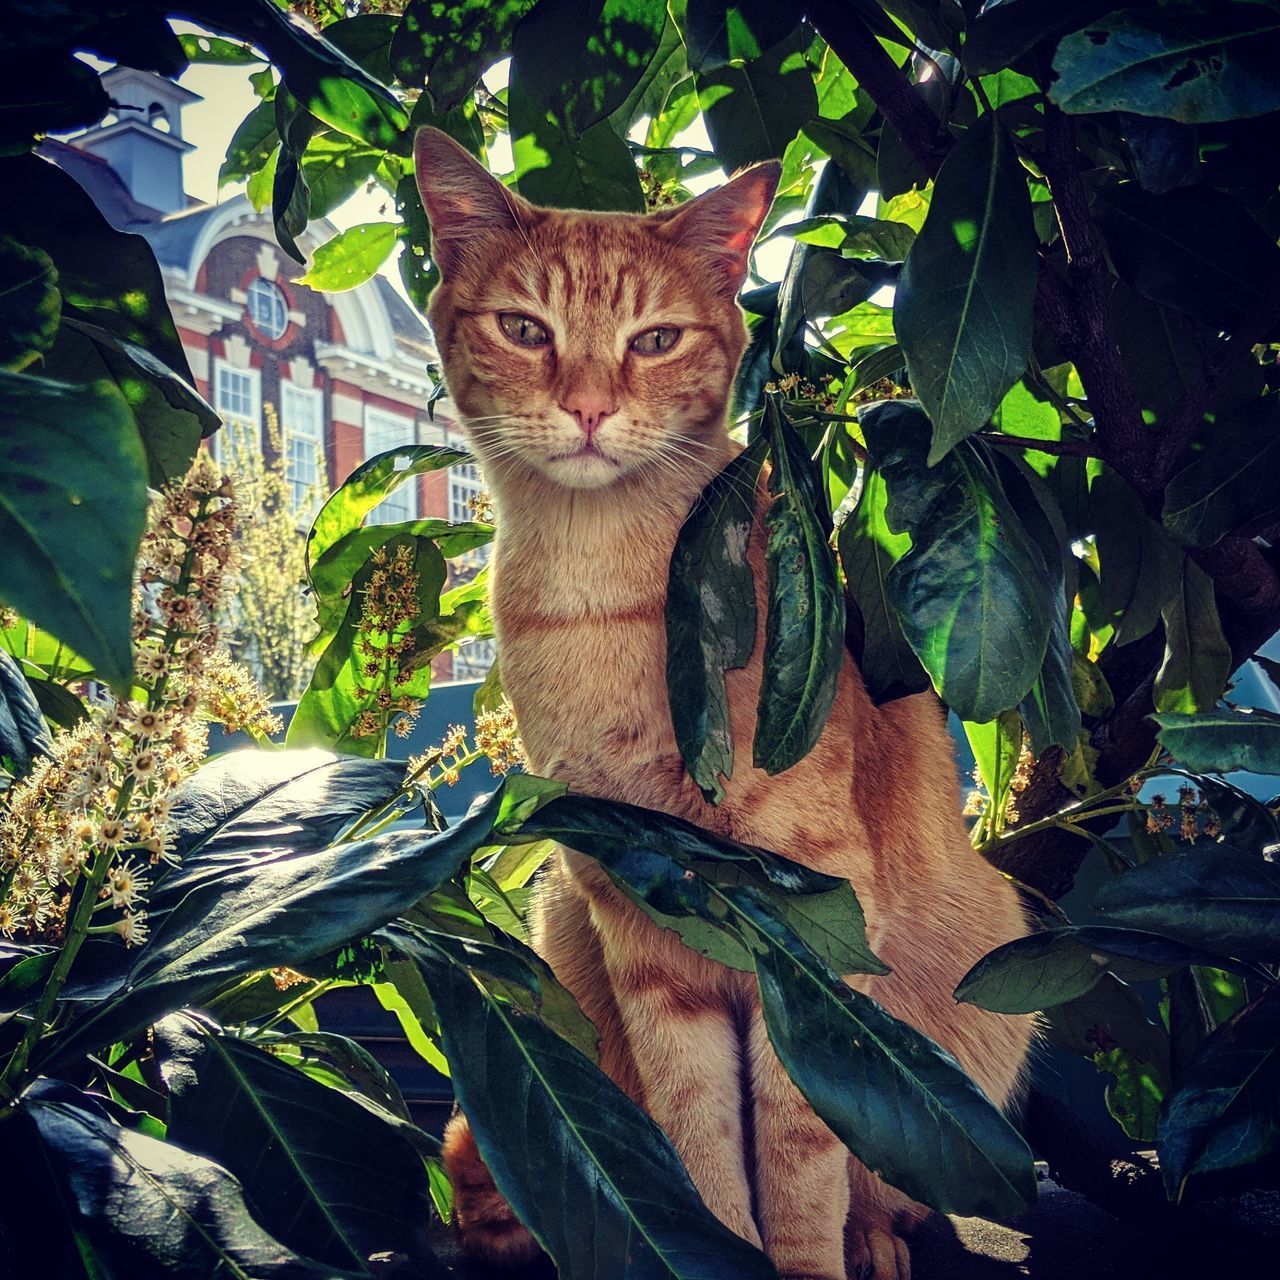 PORTRAIT OF A CAT AGAINST TREE